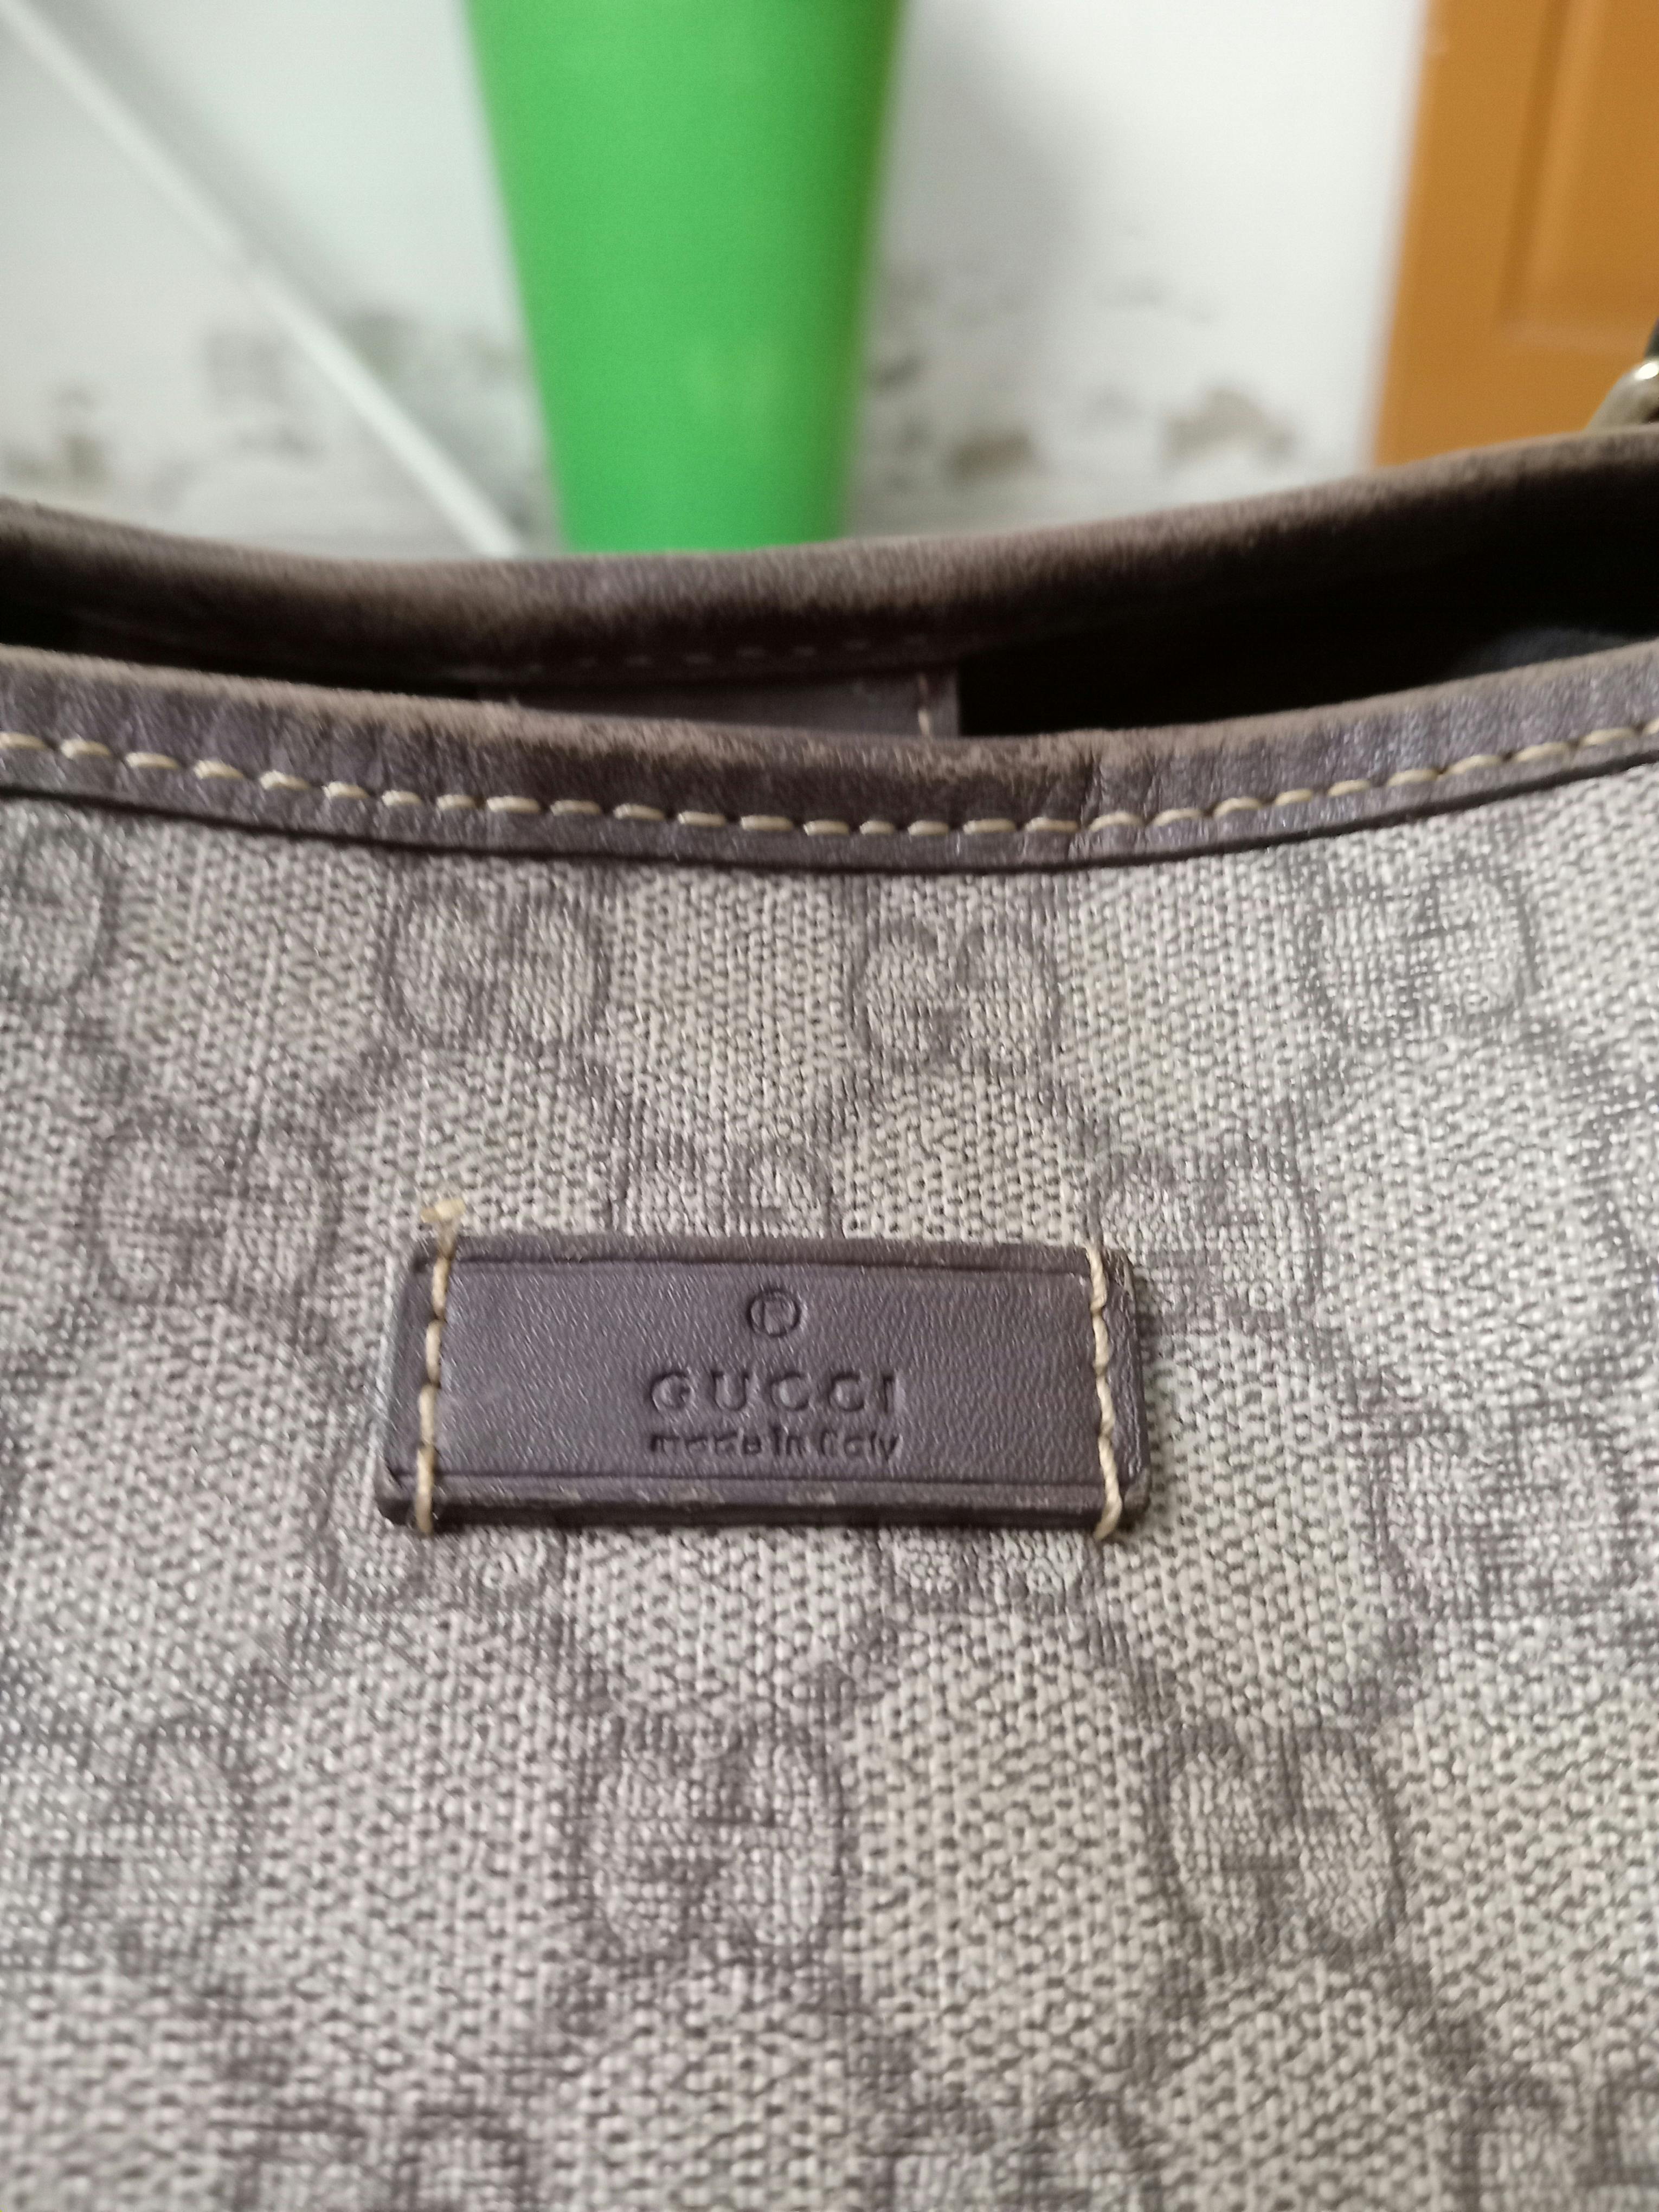 Authentic Gucci GG Canvas Beige Brown Tote Bag - 6